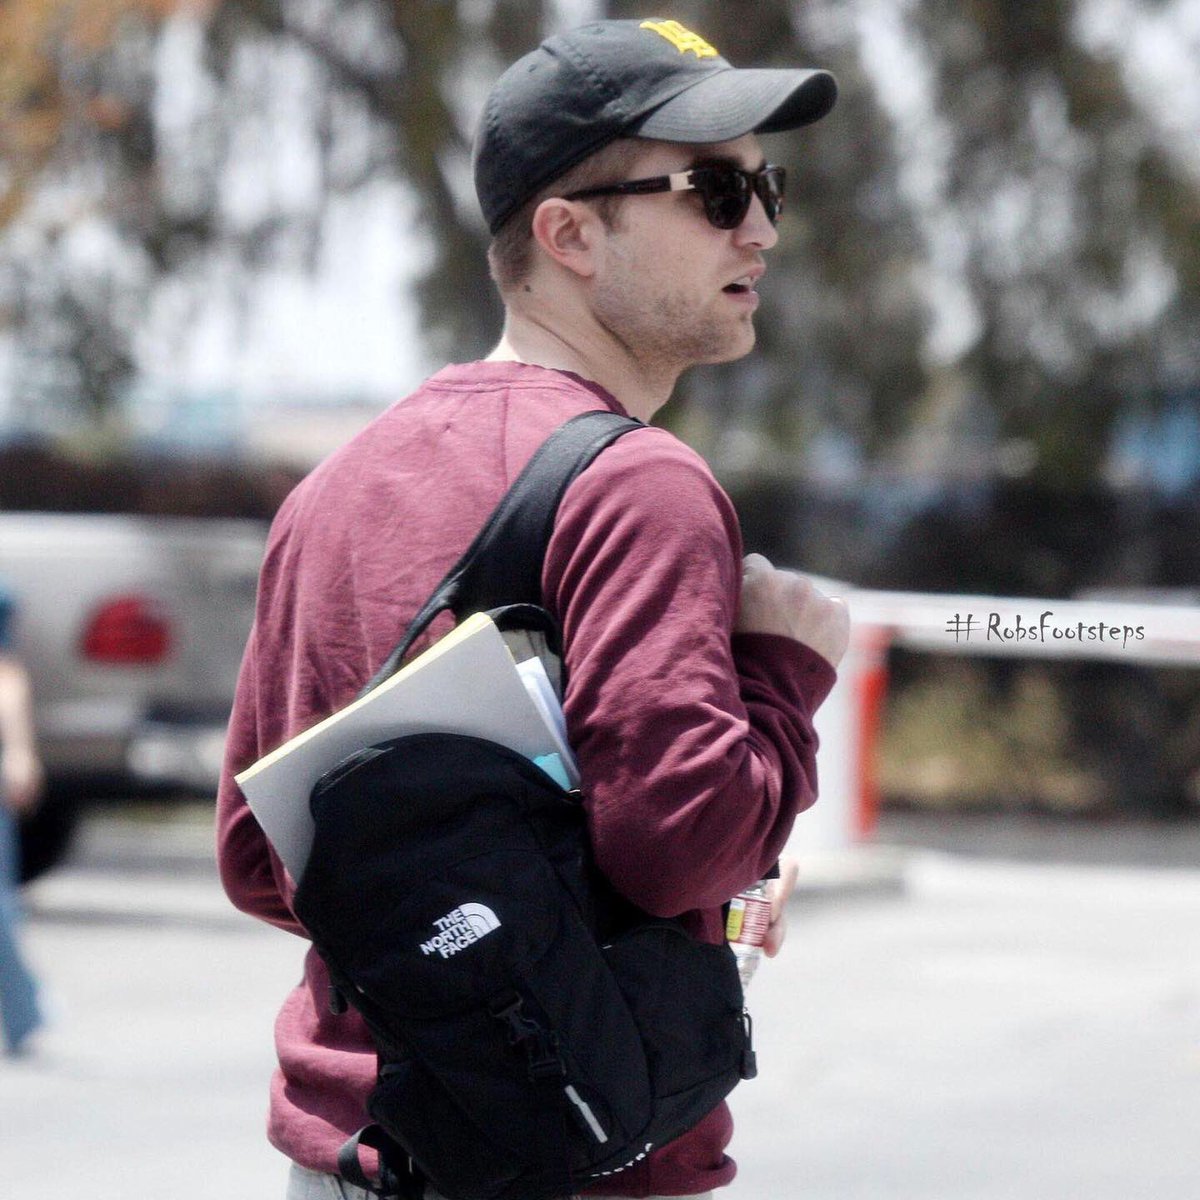 FLASHBACK: On a day like today exactly fourteen years ago, May 16th 2010, we got a first sneak peek at Robert Pattinson's then new WATER FOR ELEPHANTS haircut, when he was seen out doing errands in Los Angeles, USA. #throwback